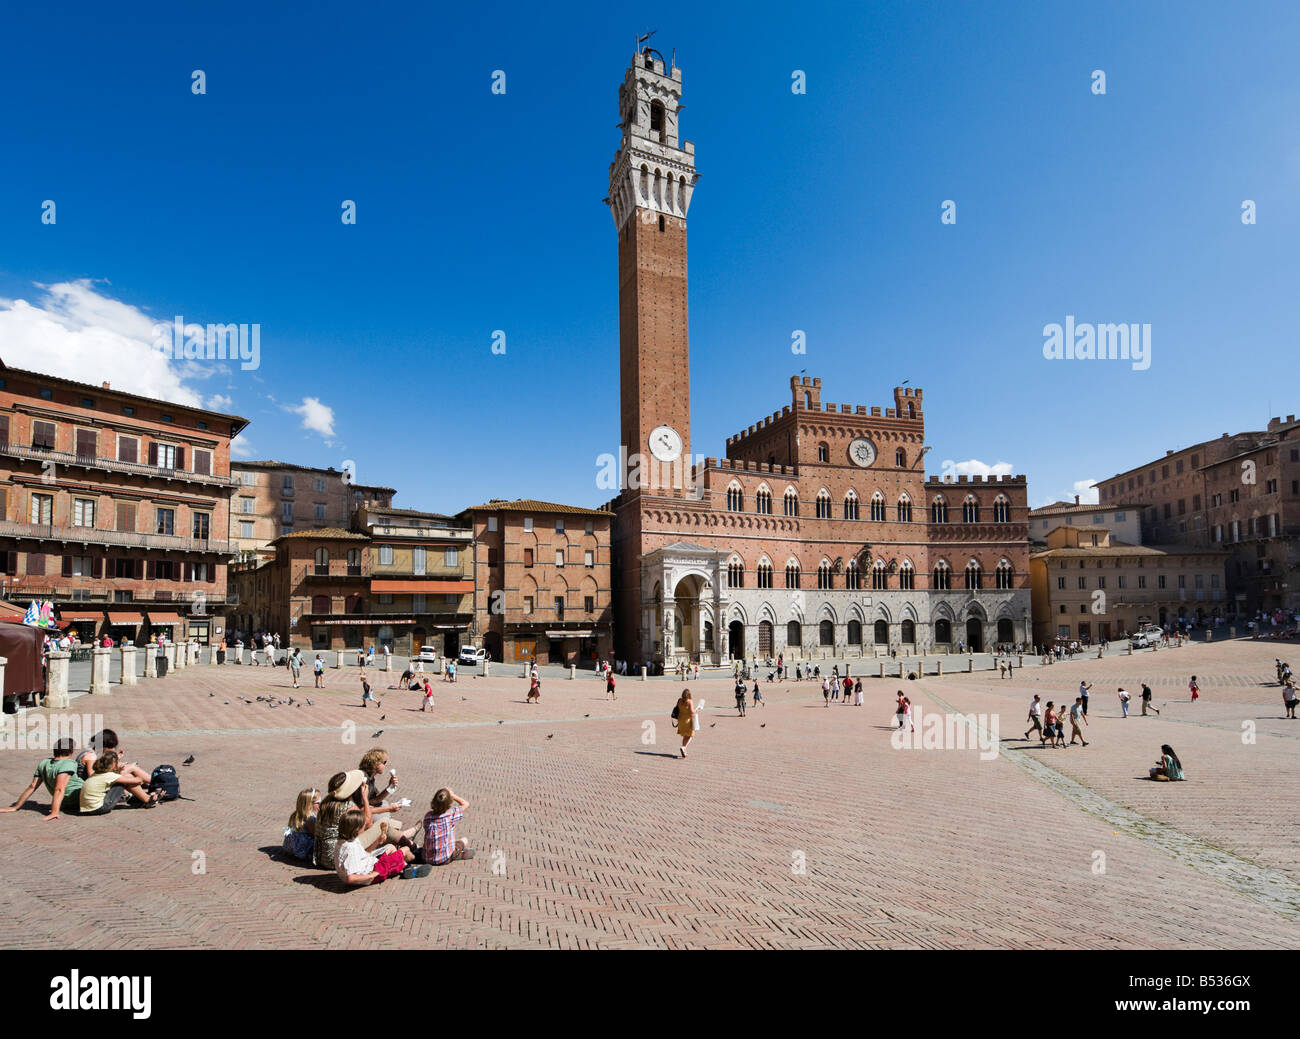 The Torre del Mangia and the Palazzo Publico in The Campo, Siena, Tuscany, Italy Stock Photo